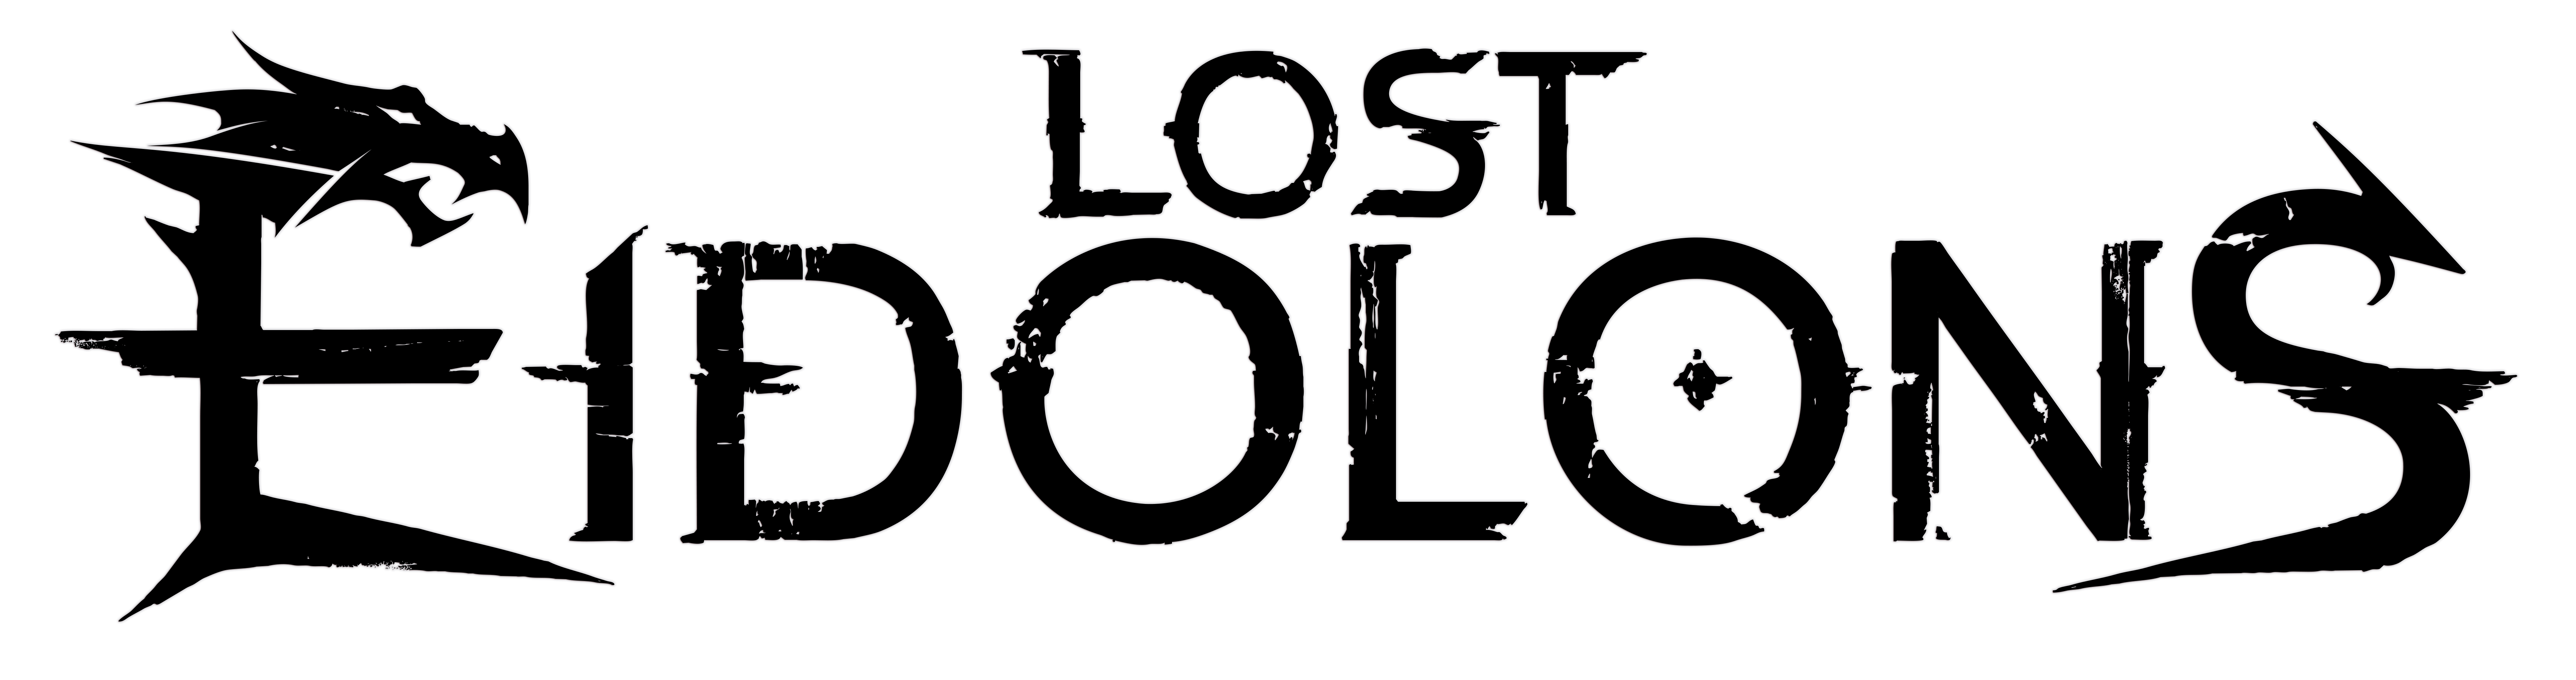 Lost Eidolons download the last version for ios